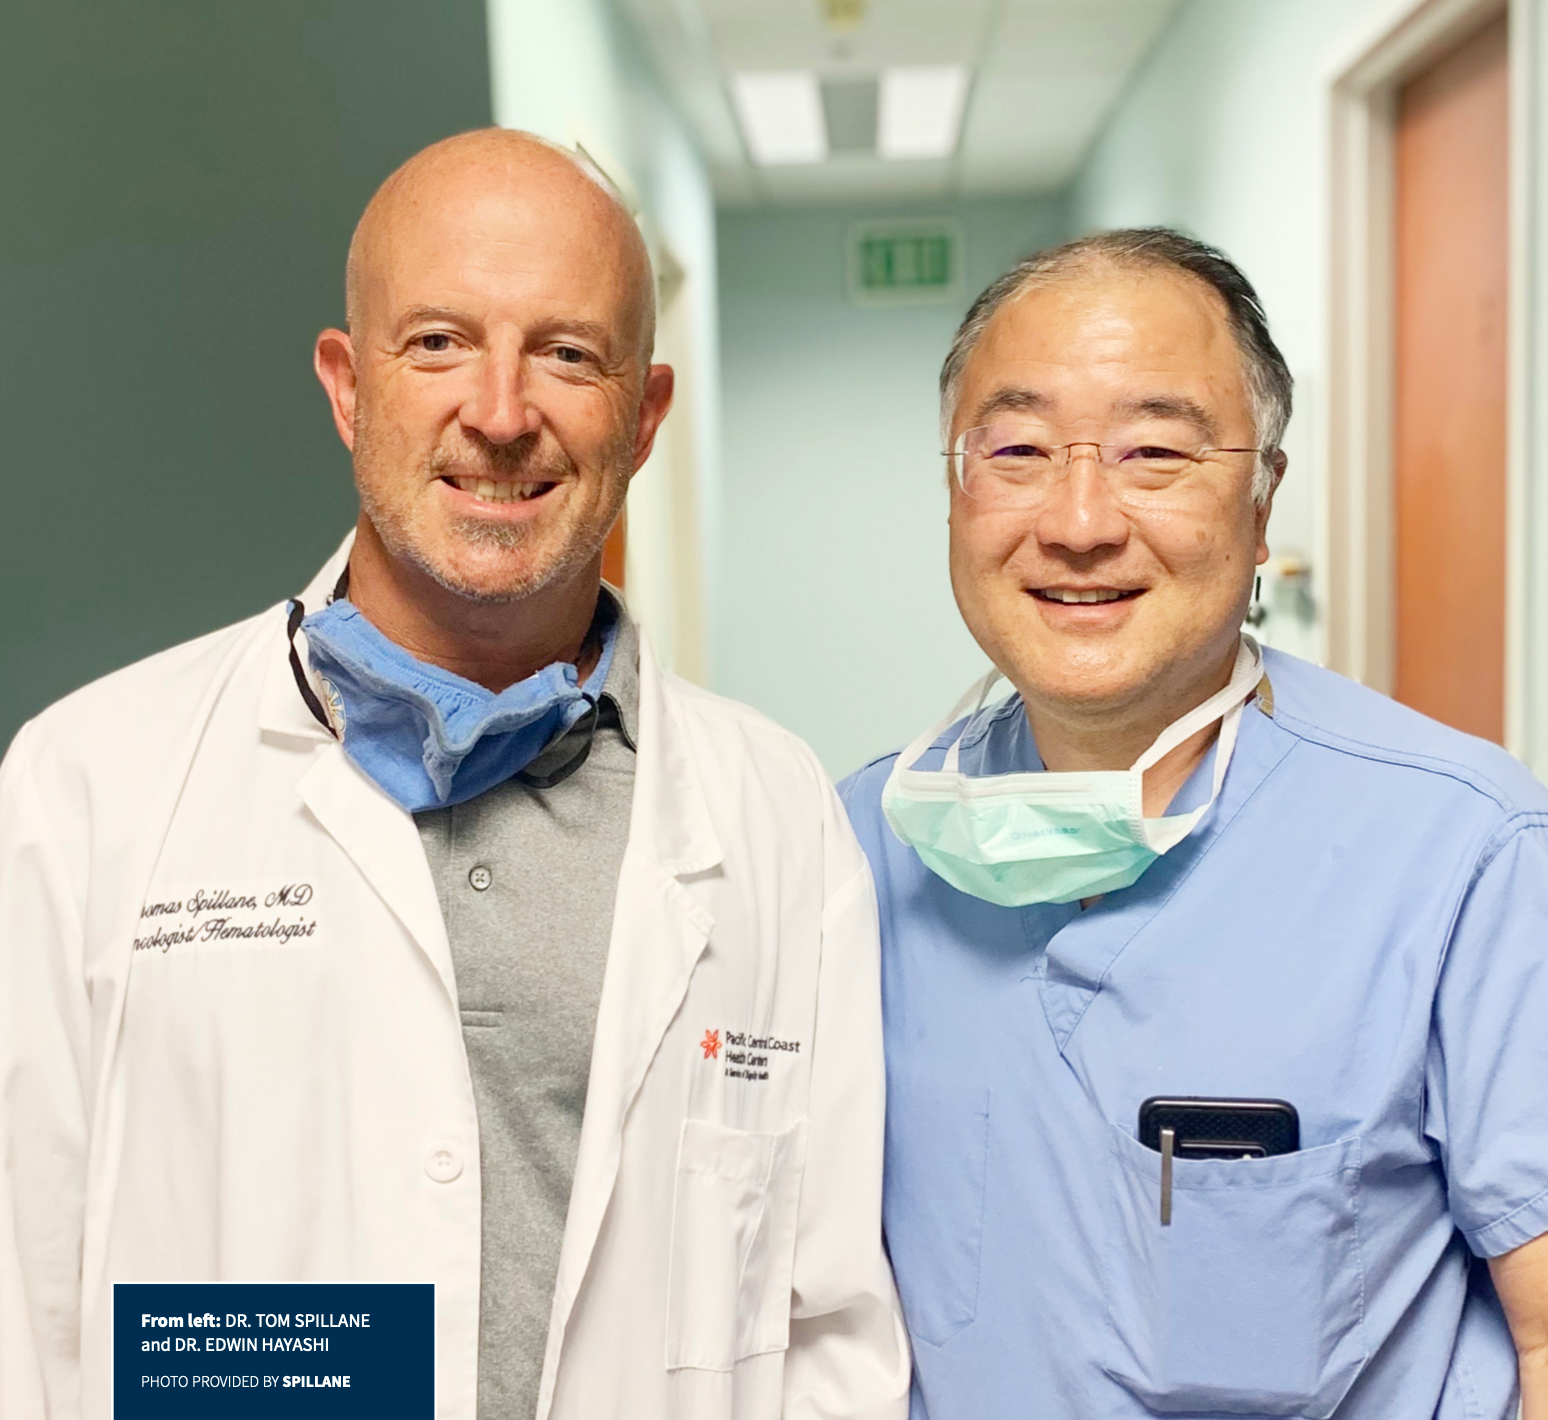 Dr. Tom Spillane (left) and Dr. Edwin Hayashi (right)